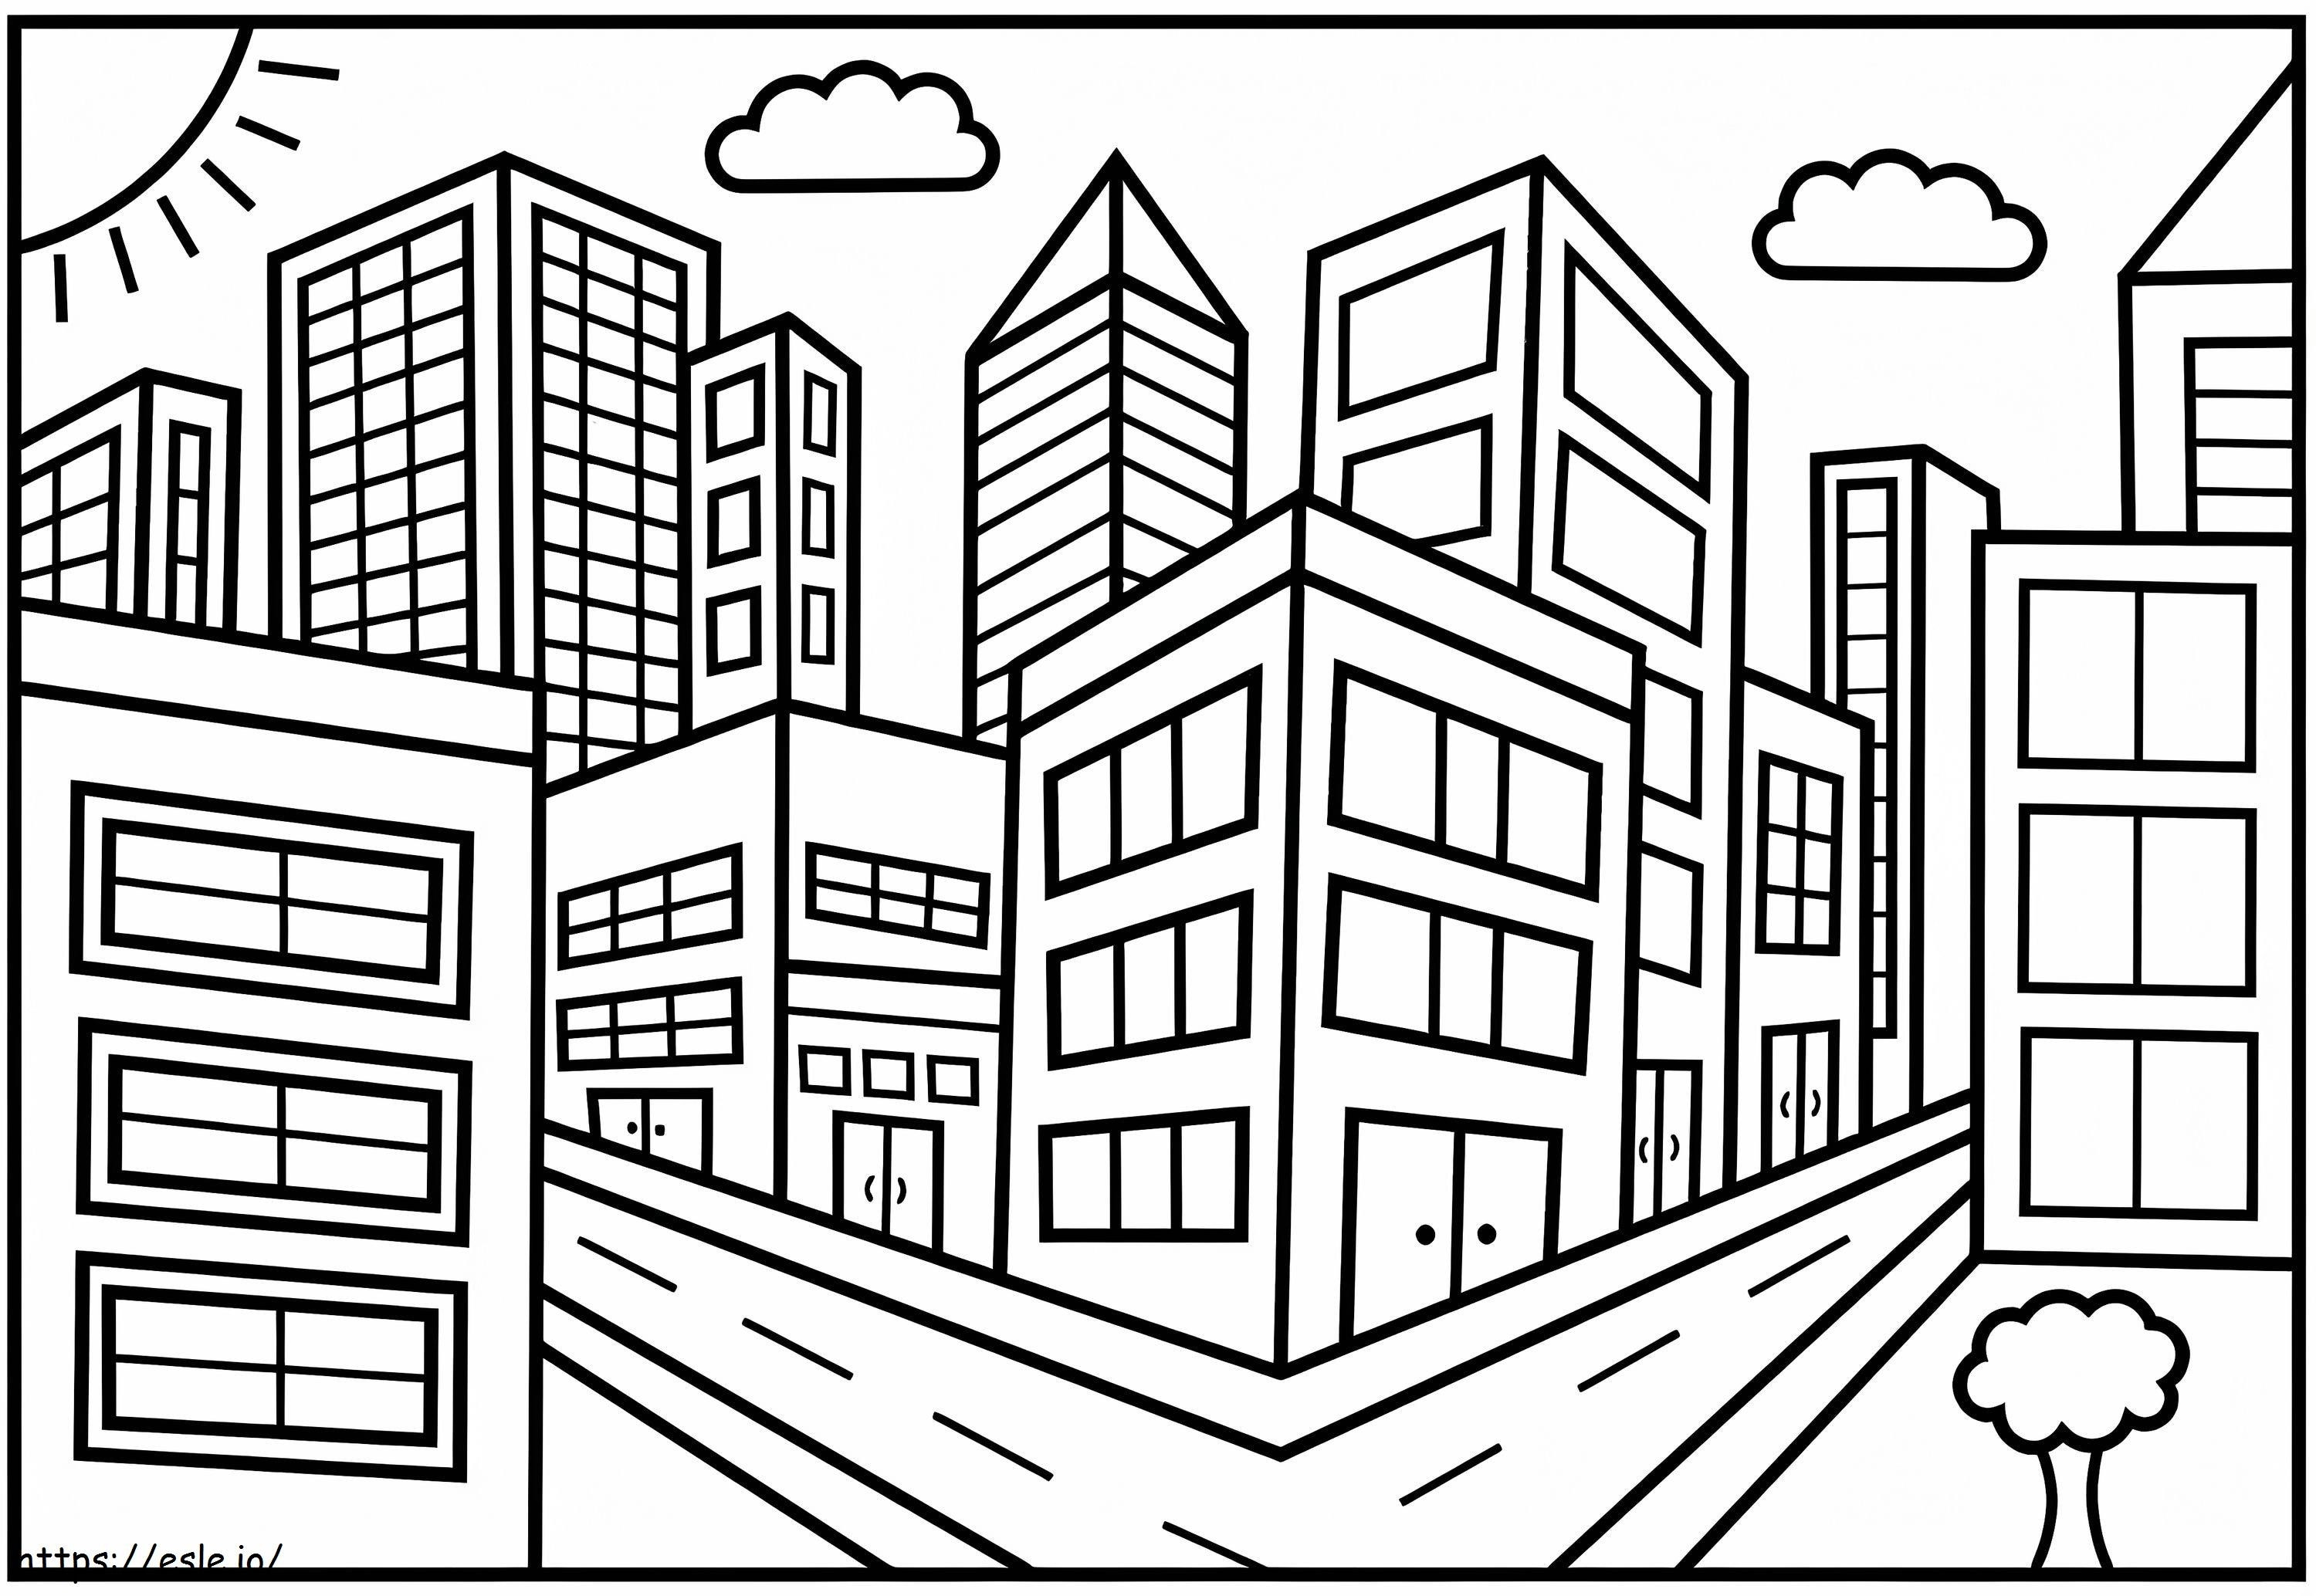 Basic City Building coloring page